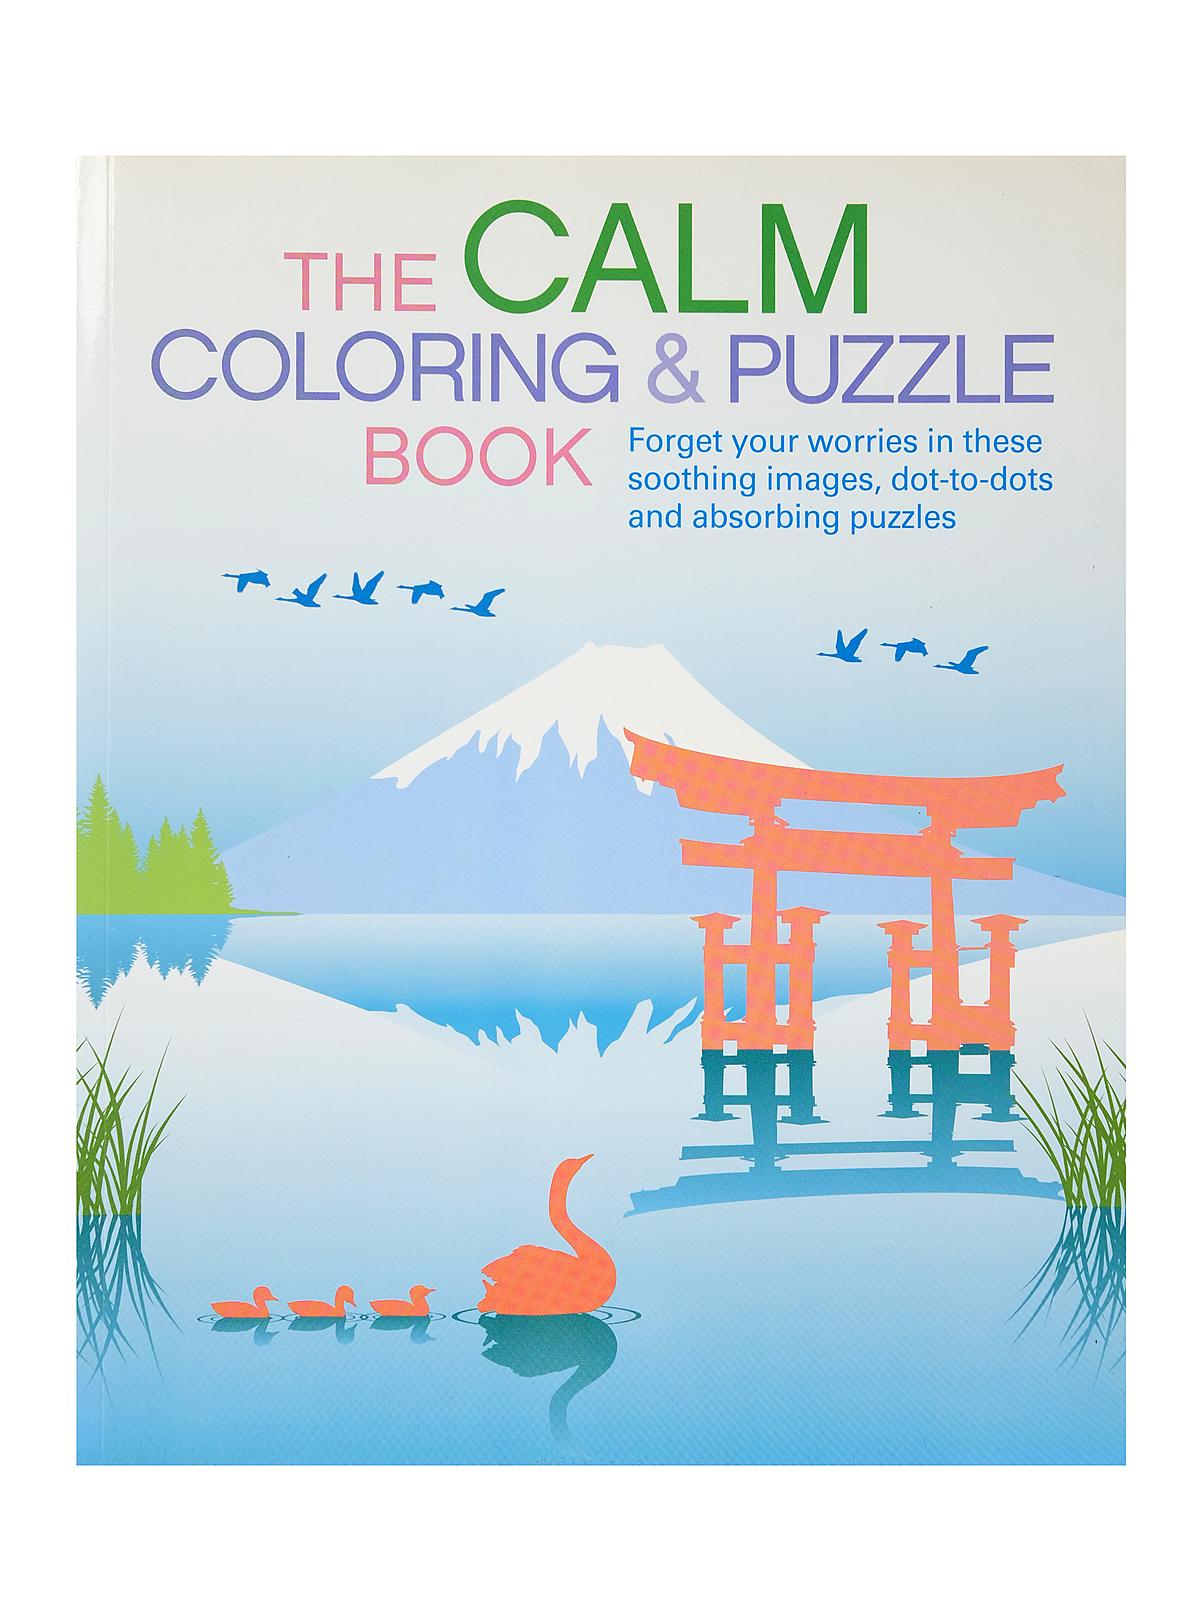 The Calm Coloring & Puzzle Book Each